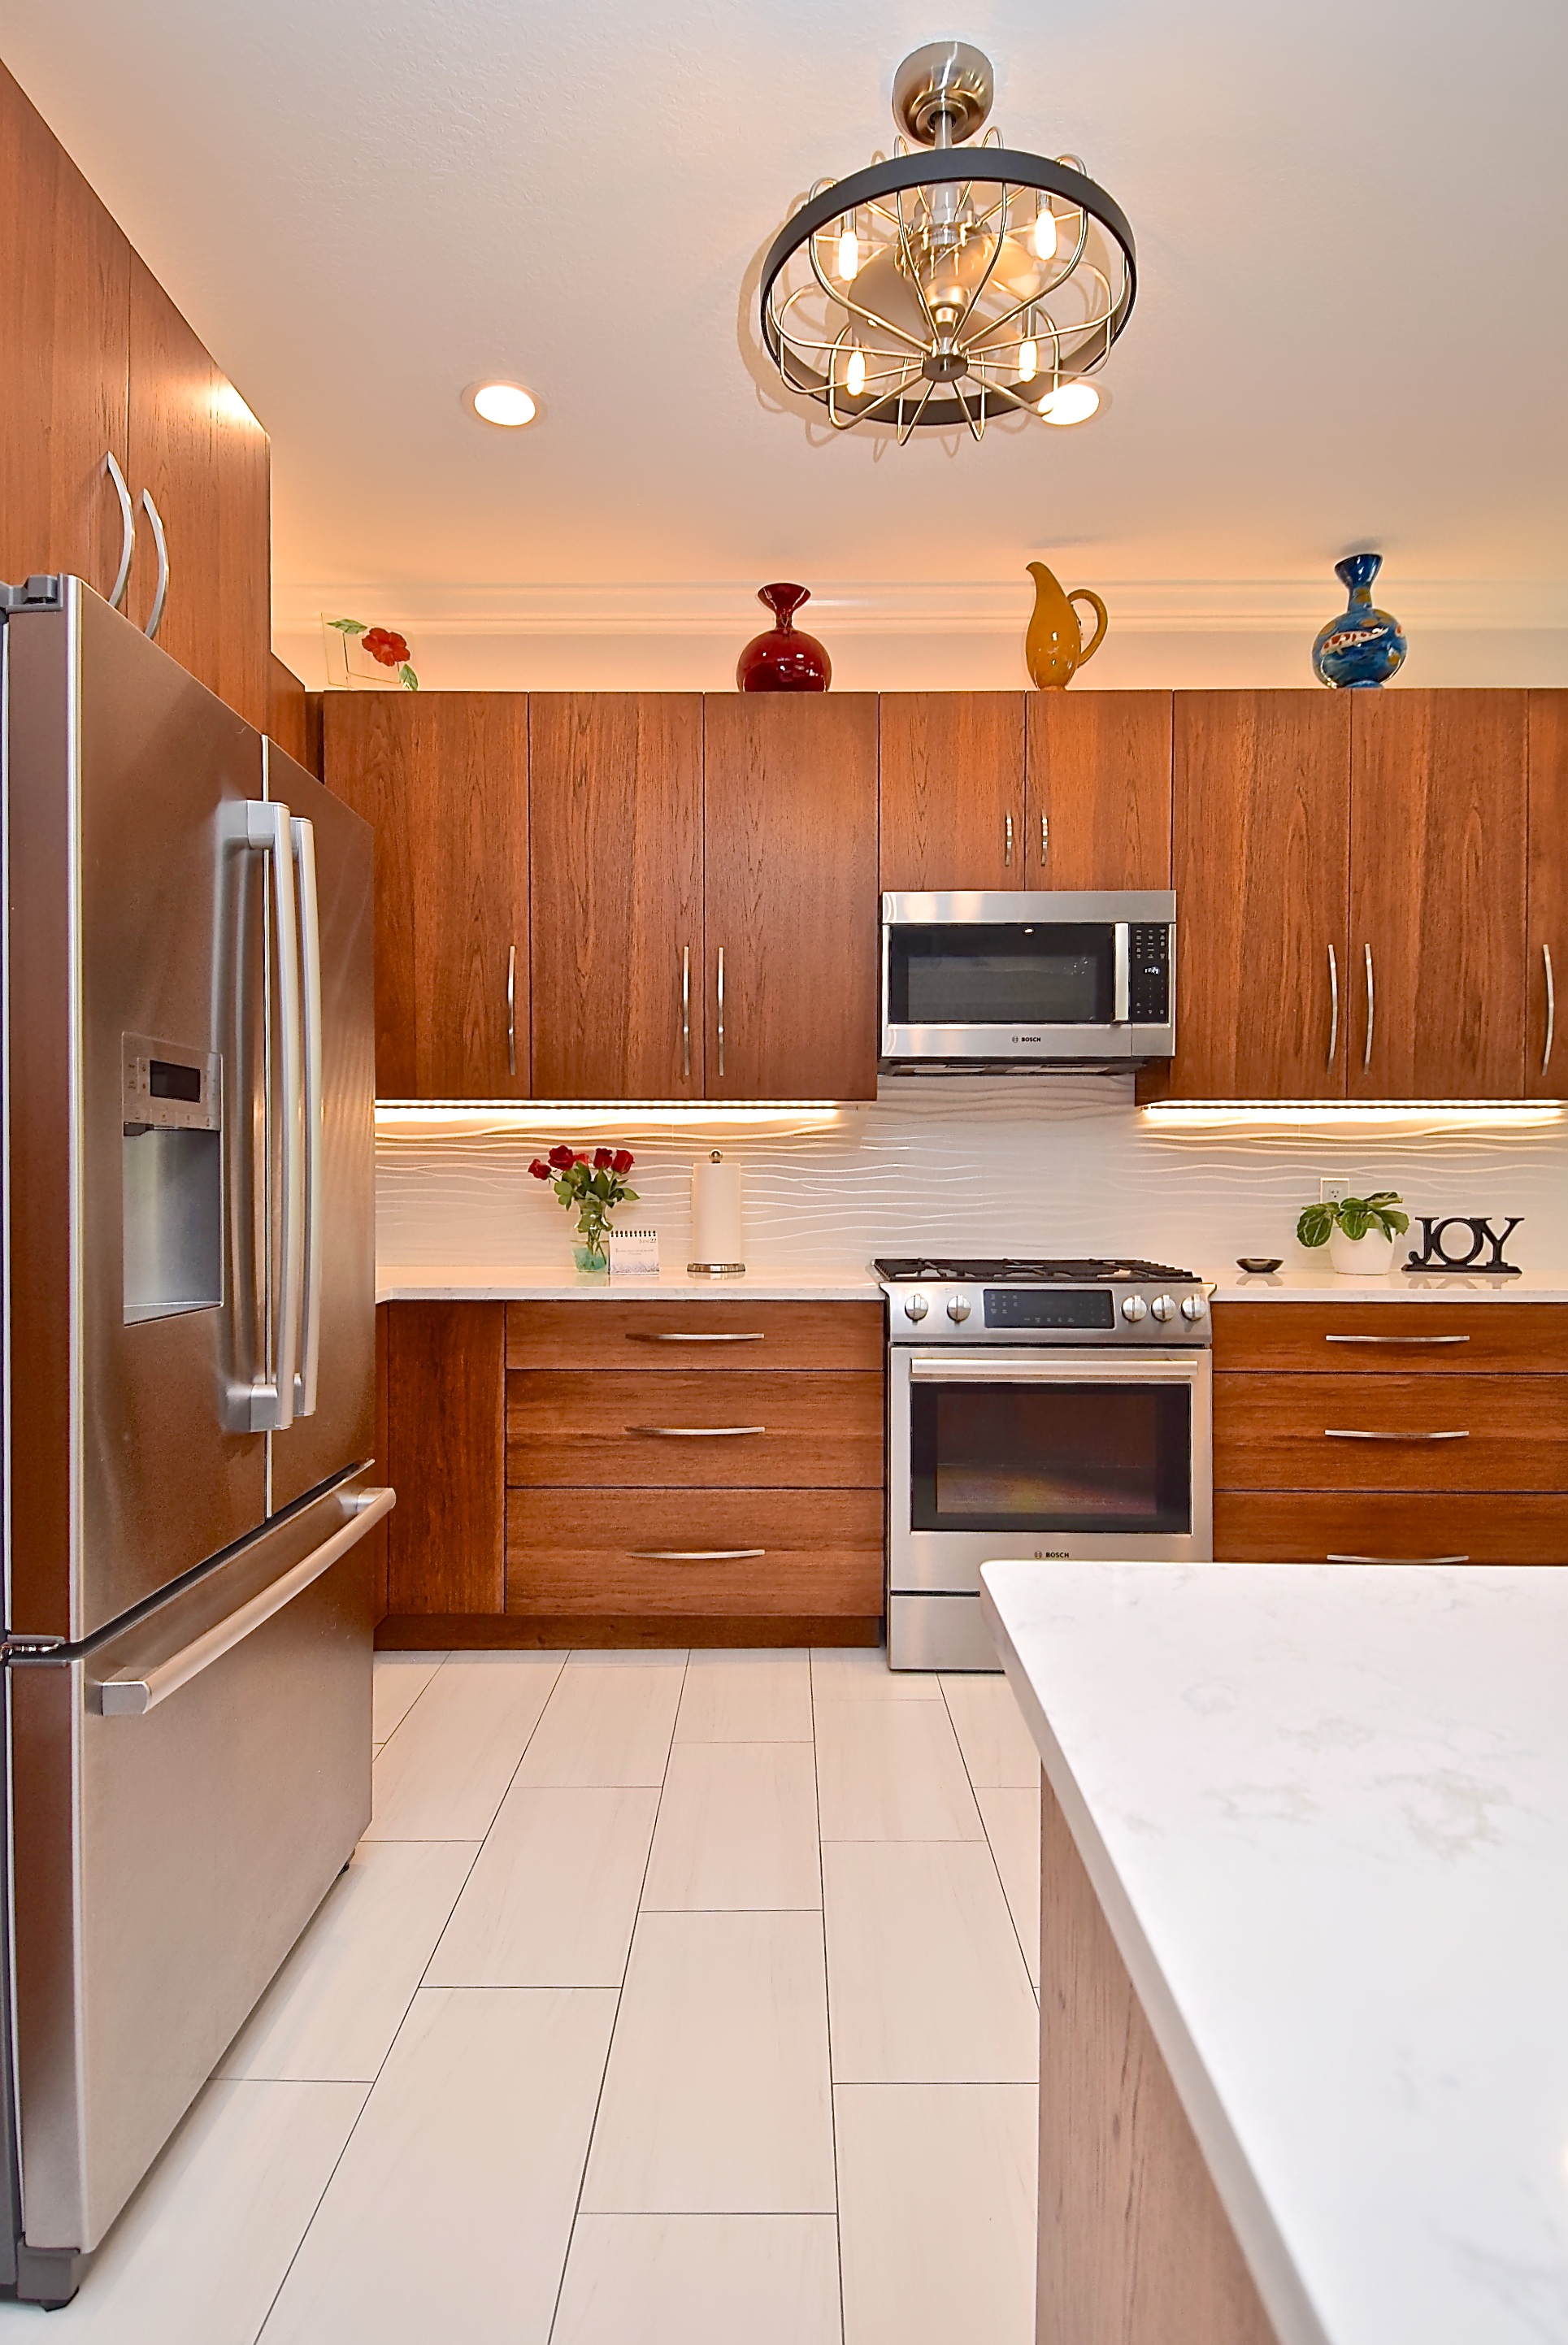 Mid Century Modern Kitchen Remodel in Sarasota Warm Wood Cabinets Stainless Steel Appliances